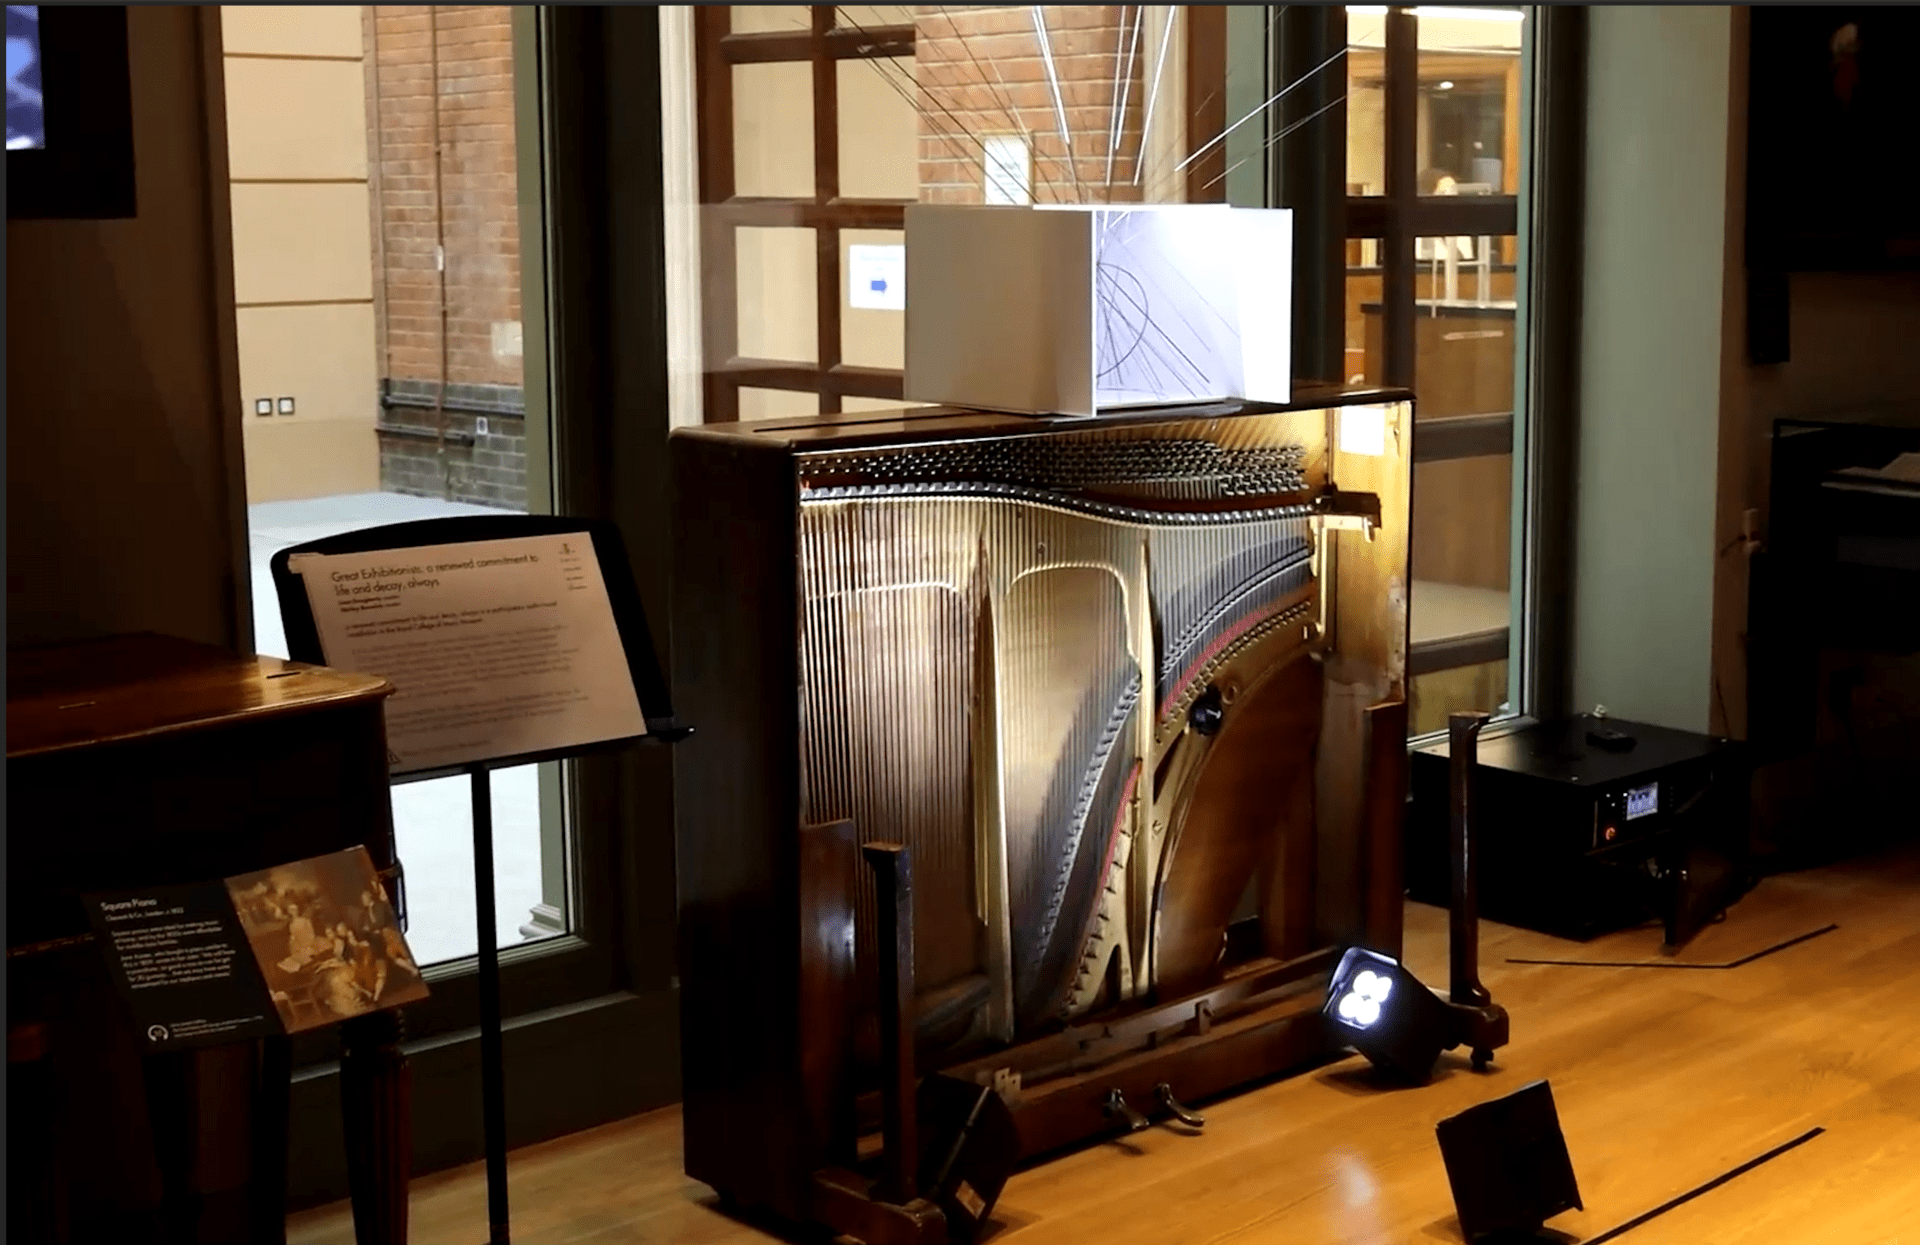 Photograph of objects, including a stand holding a printed page, and what looks like the back section of an upright piano, strings exposed, displayed in front of a window in a softly lit space.